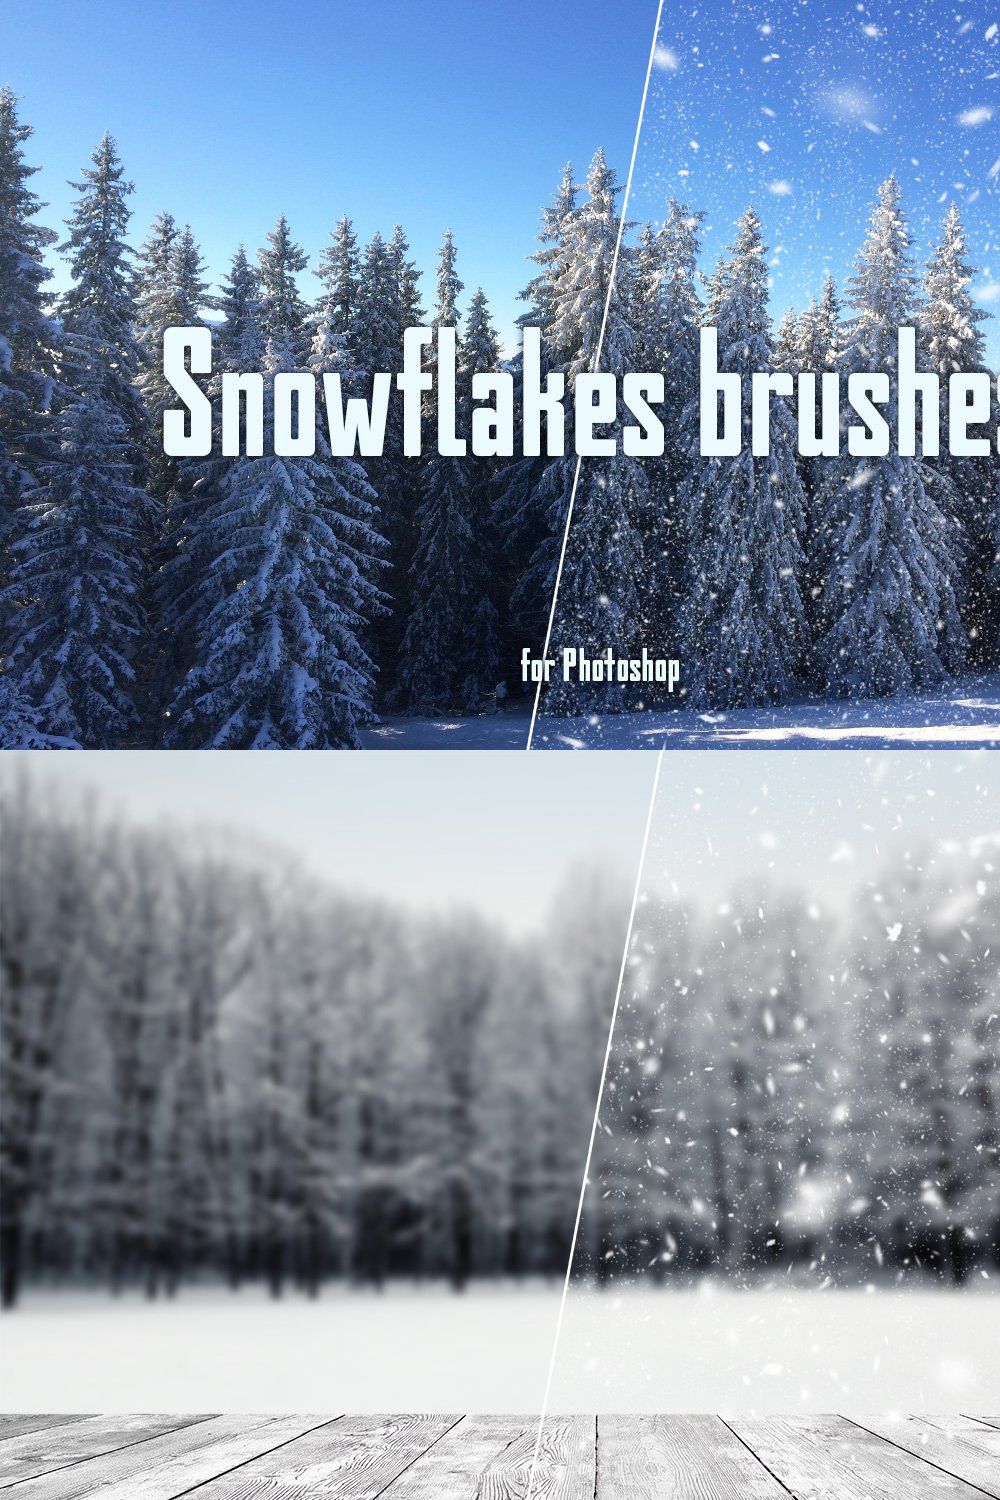 Real snowflakes brush pinterest preview image.